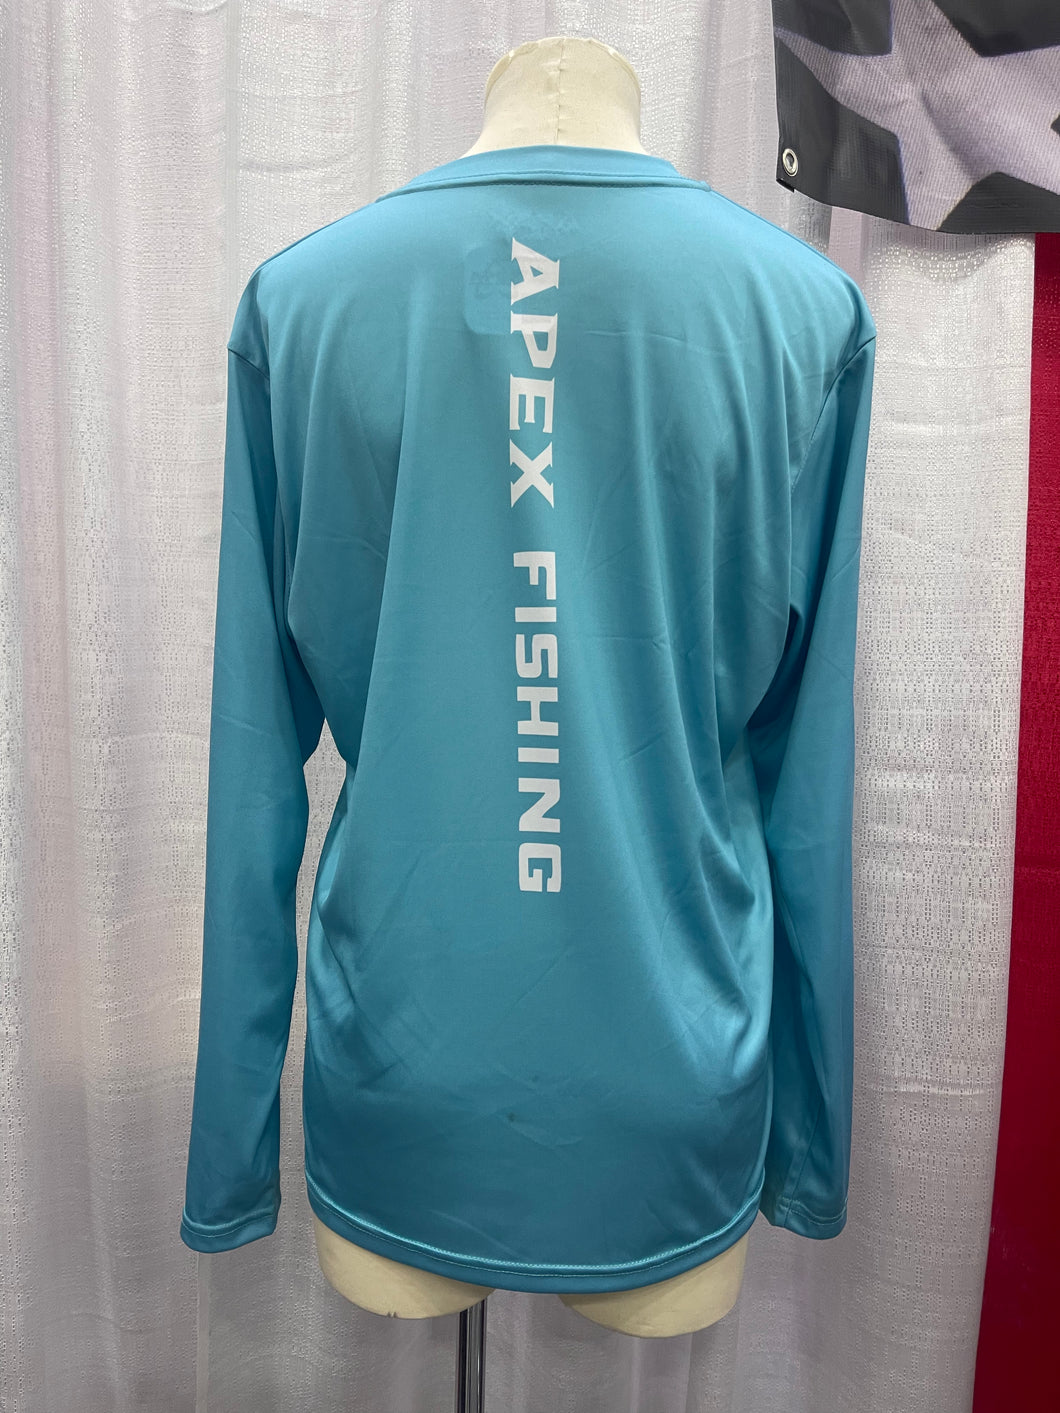 APEX Turquoise Long Sleeve